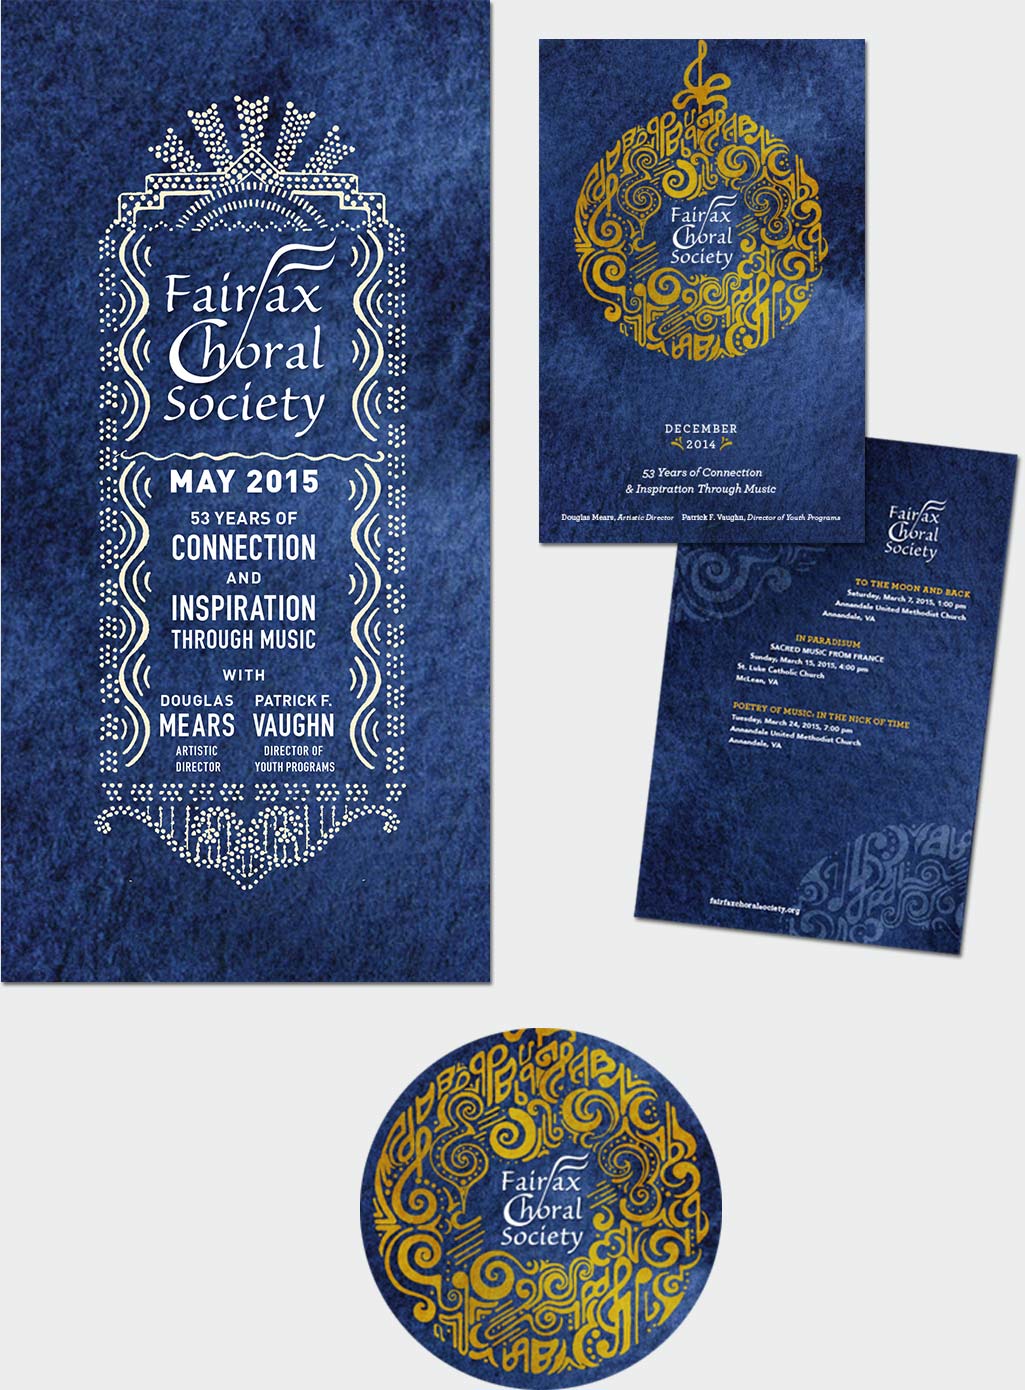 Poster, program and CD design for Fairfax Choral Society